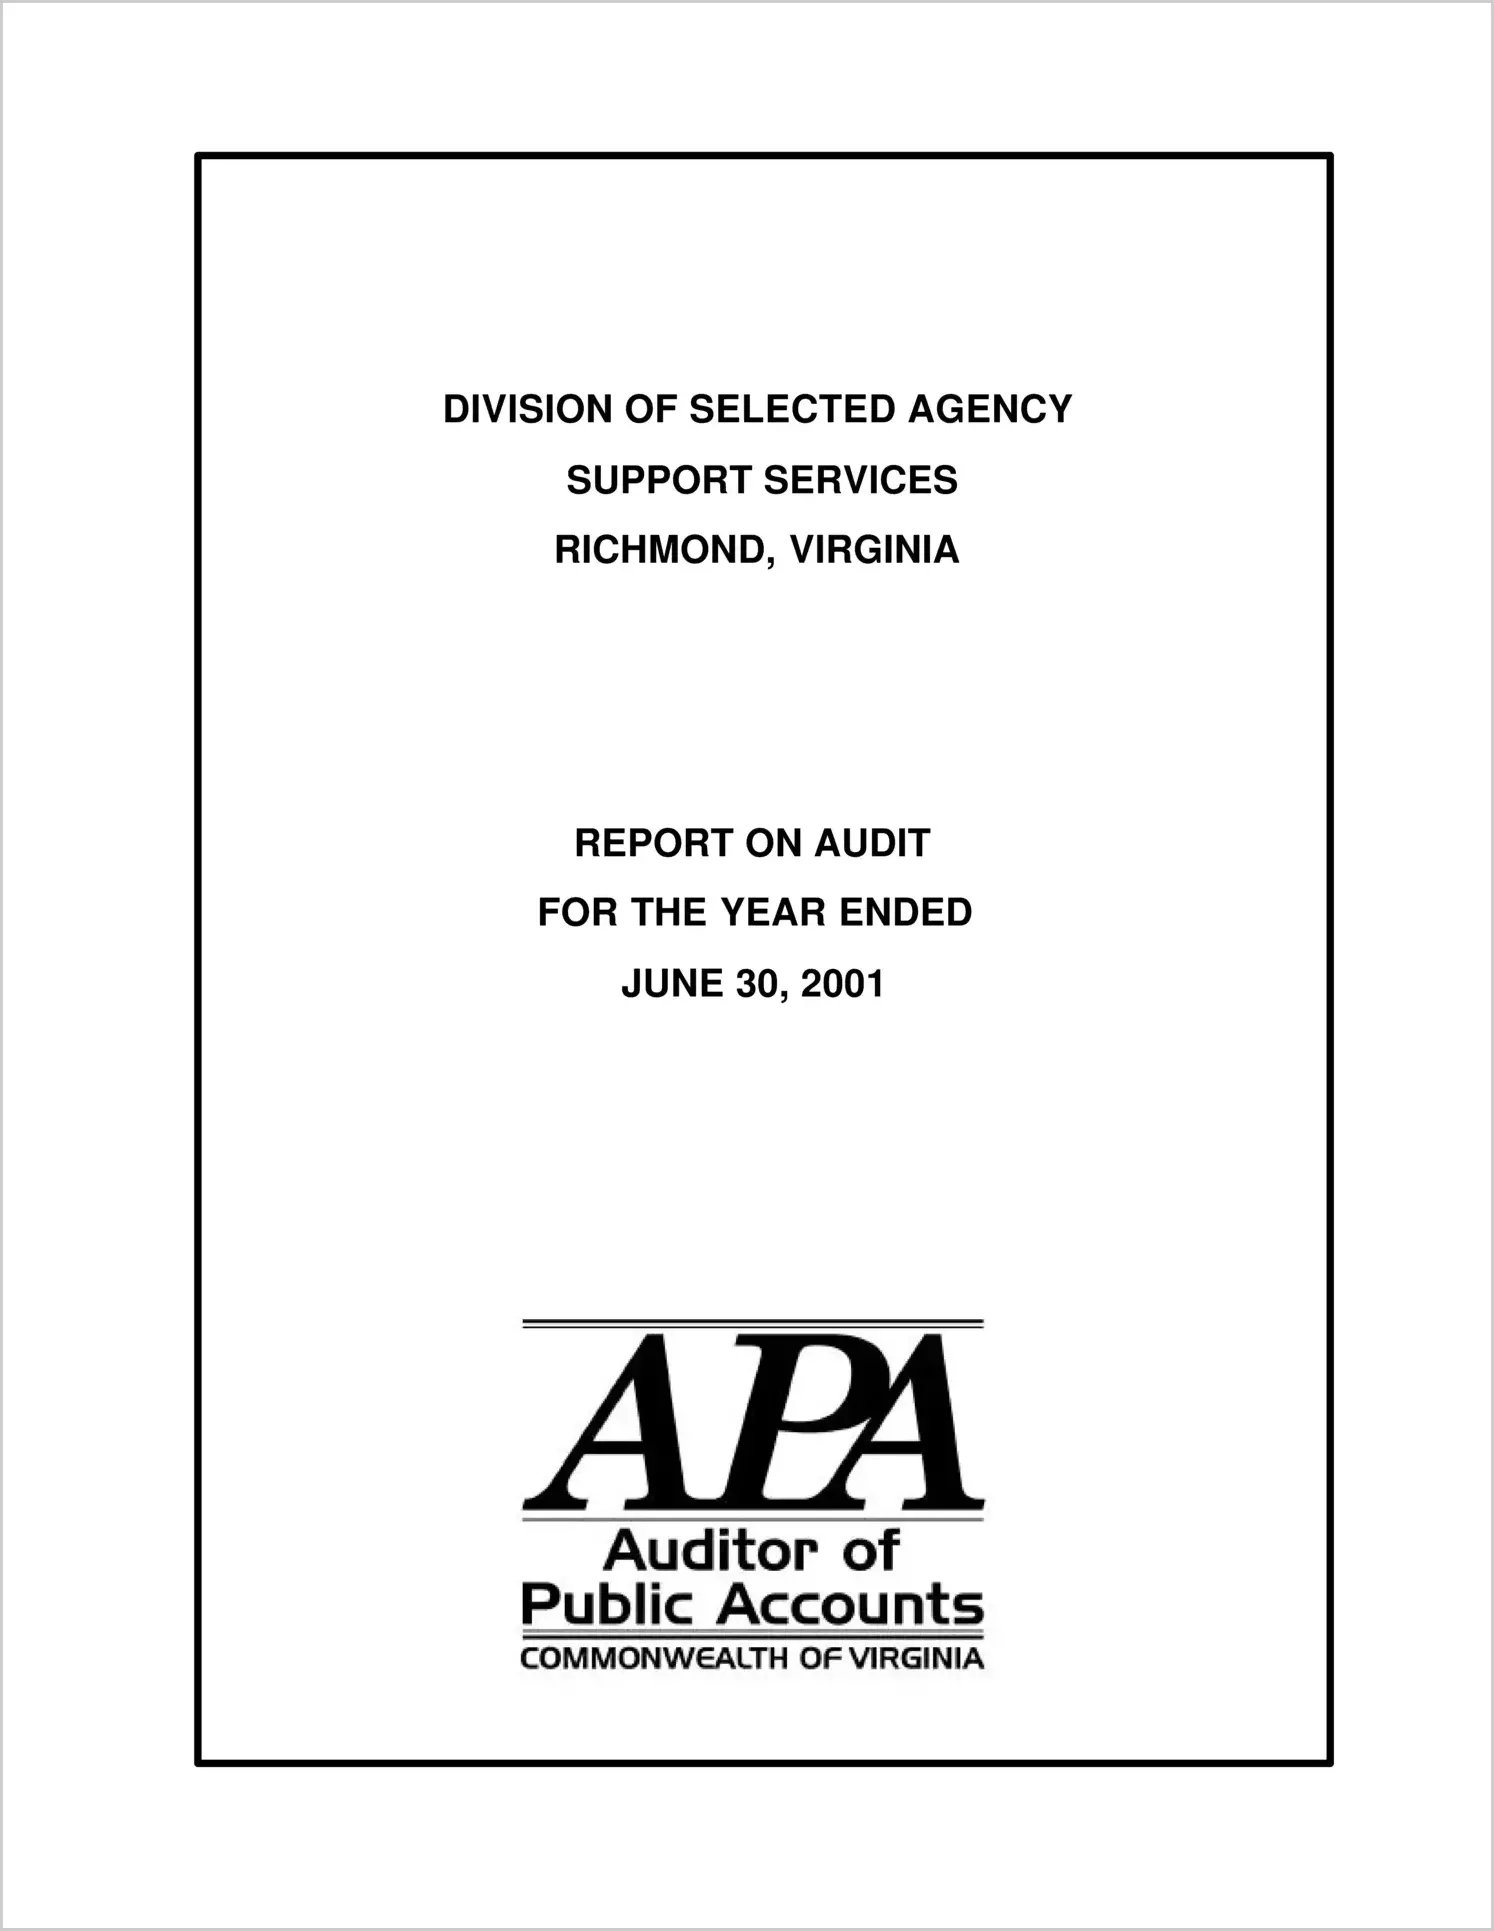 Division of Selected Agency Support Services for the year ended June 30, 2001